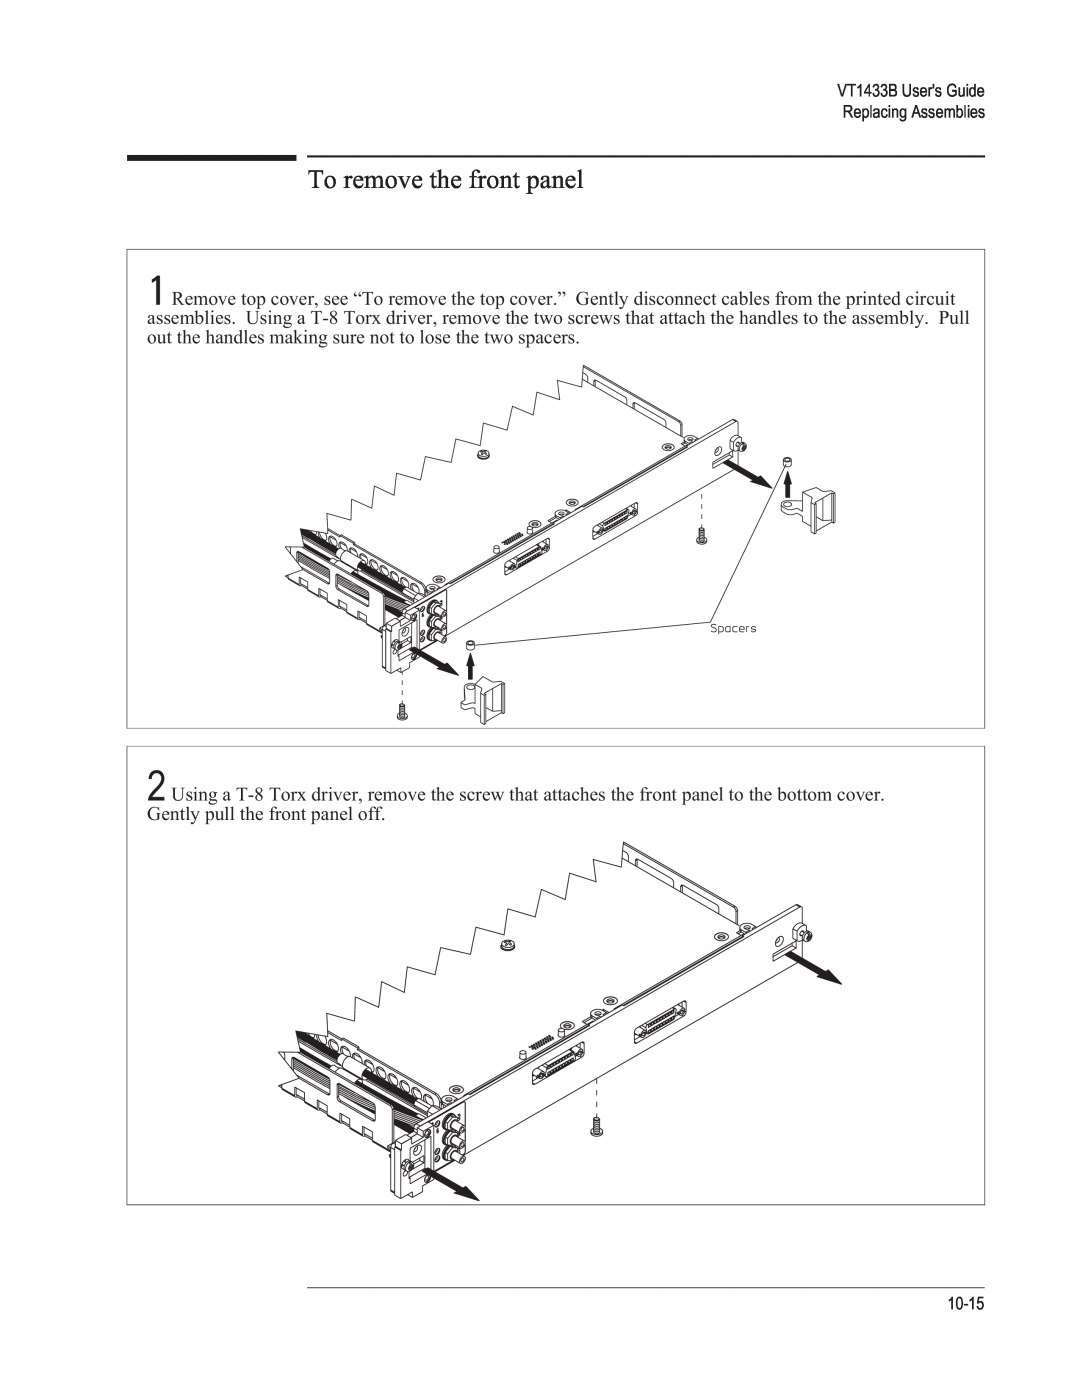 VXI manual To remove the front panel, VT1433B Users Guide Replacing Assemblies, 10-15 